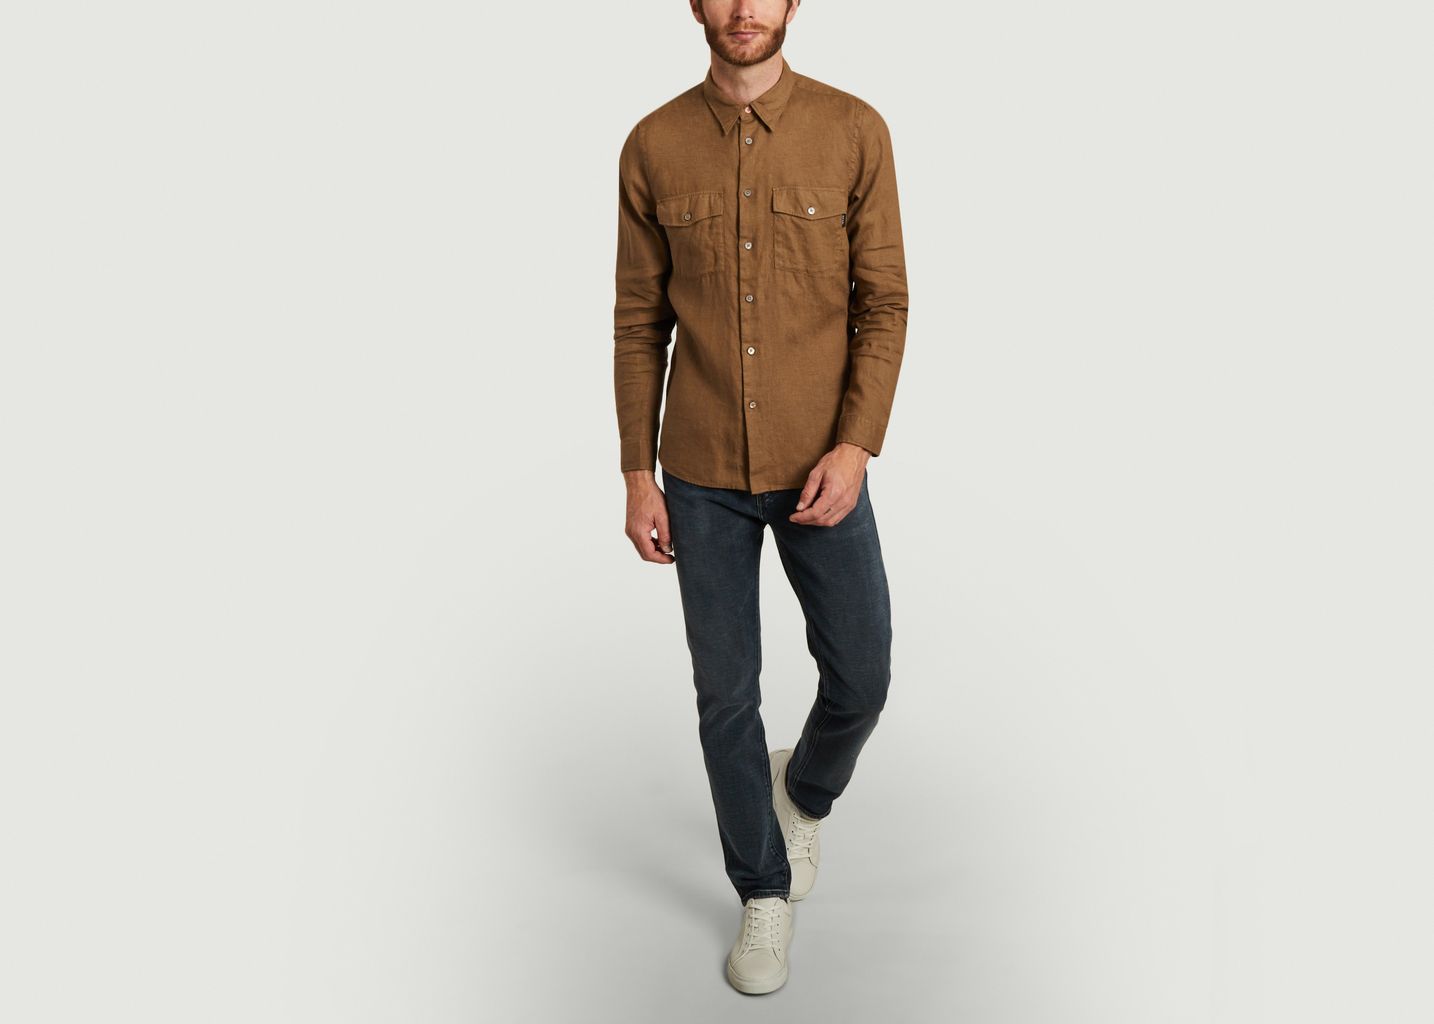 Linen shirt - PS by PAUL SMITH